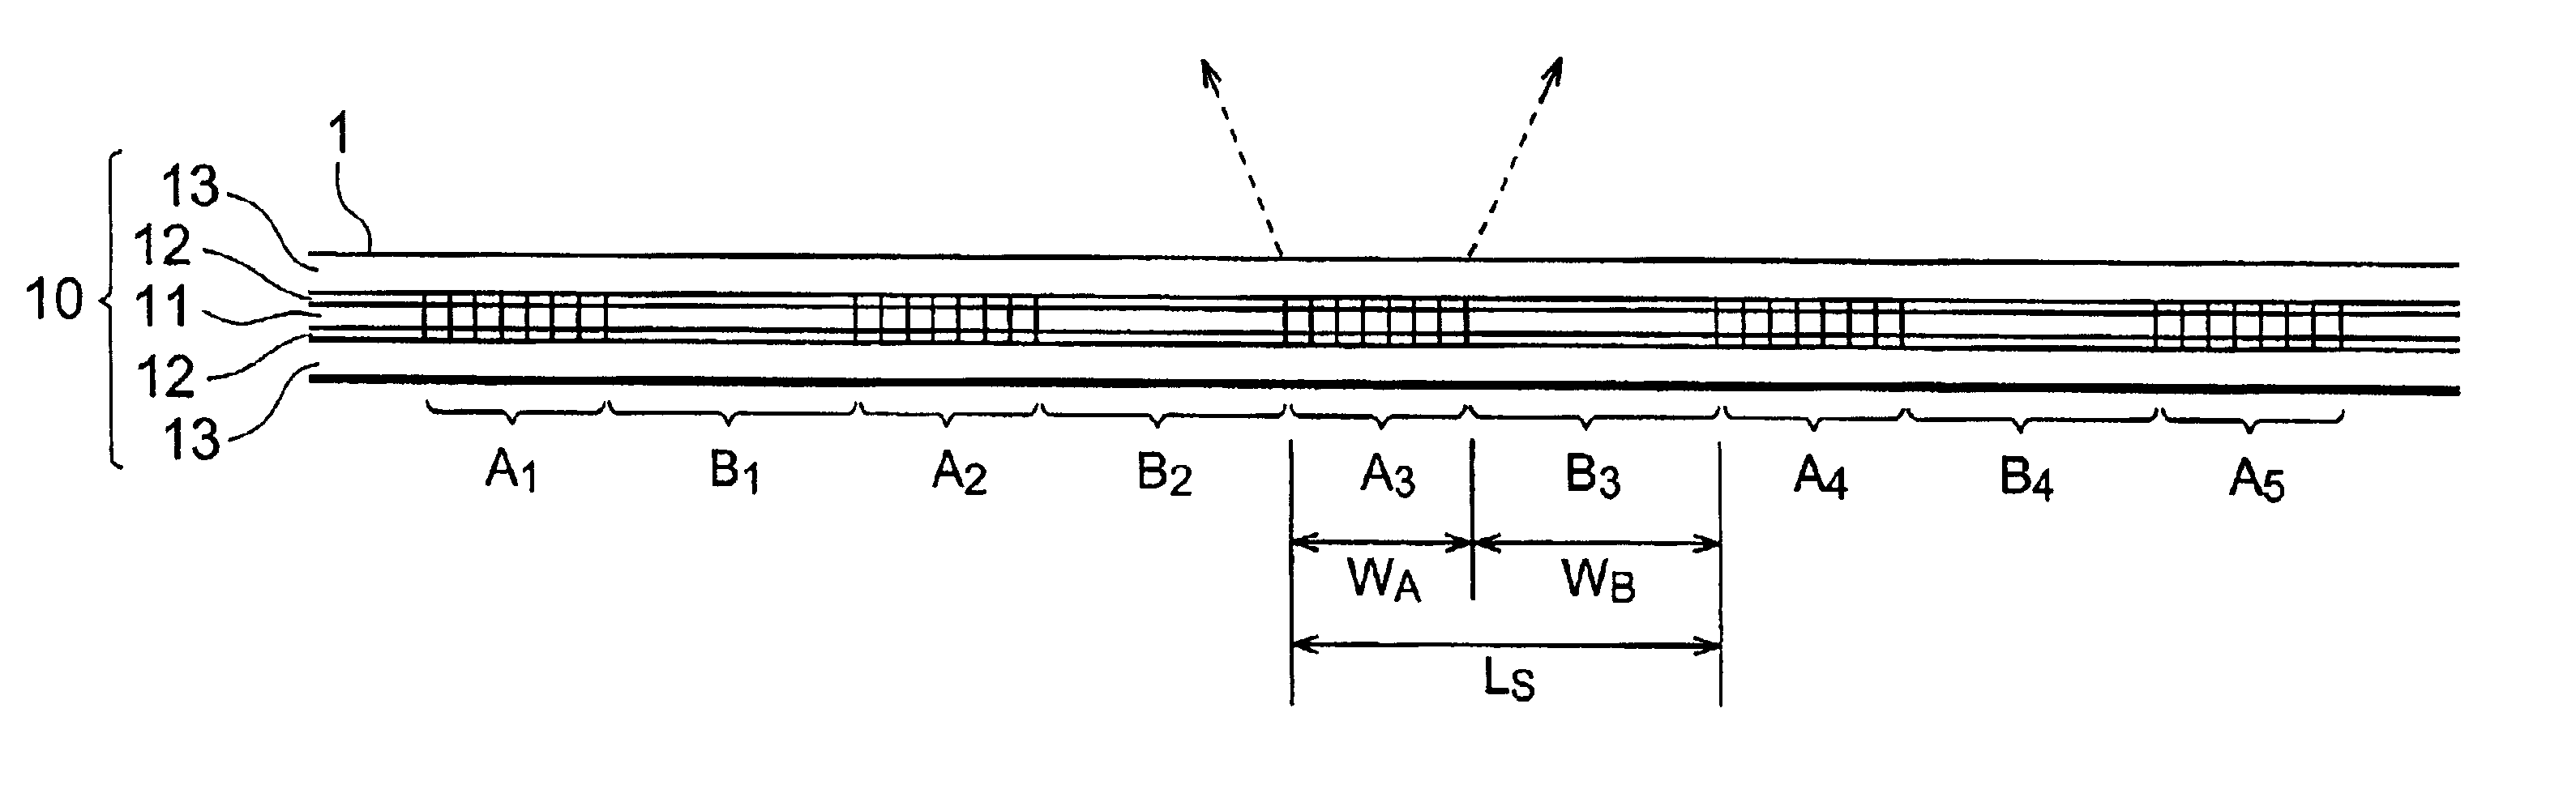 Diffraction grating device